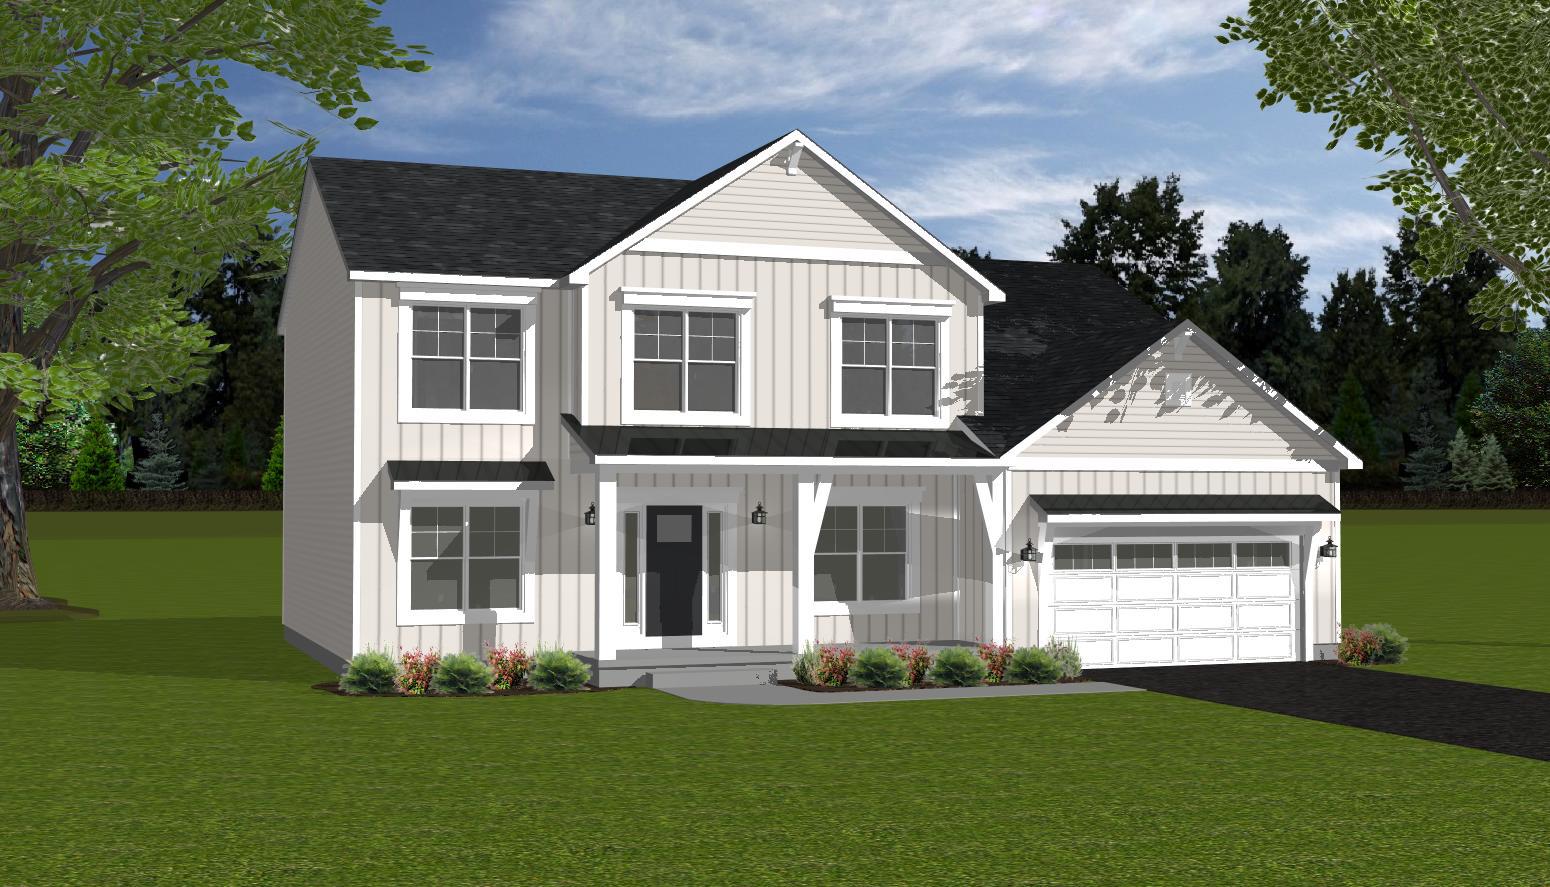 4br New Home in Grand Island, NY